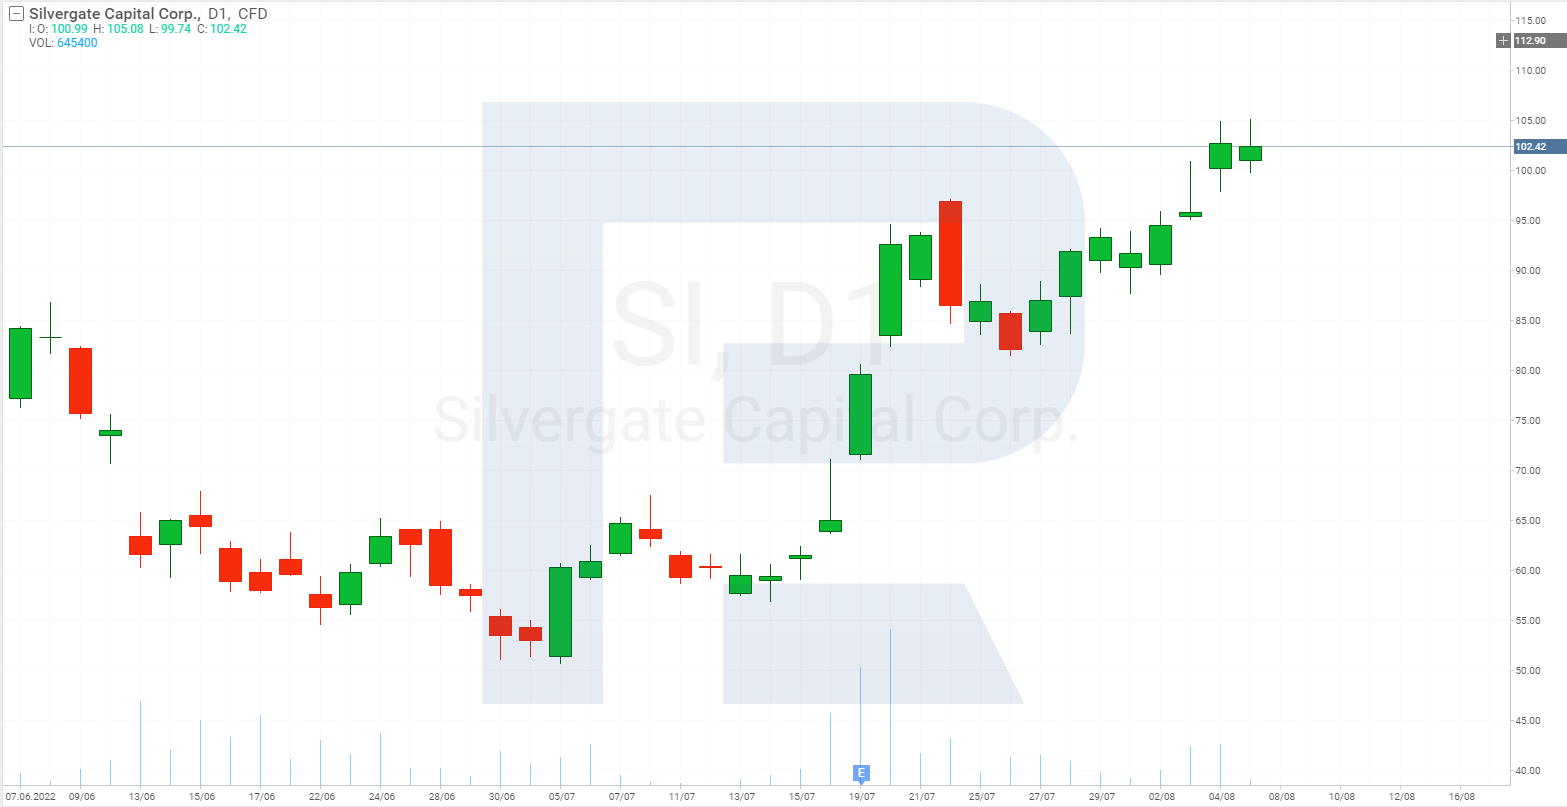 Share price chart of Silvergate Capital